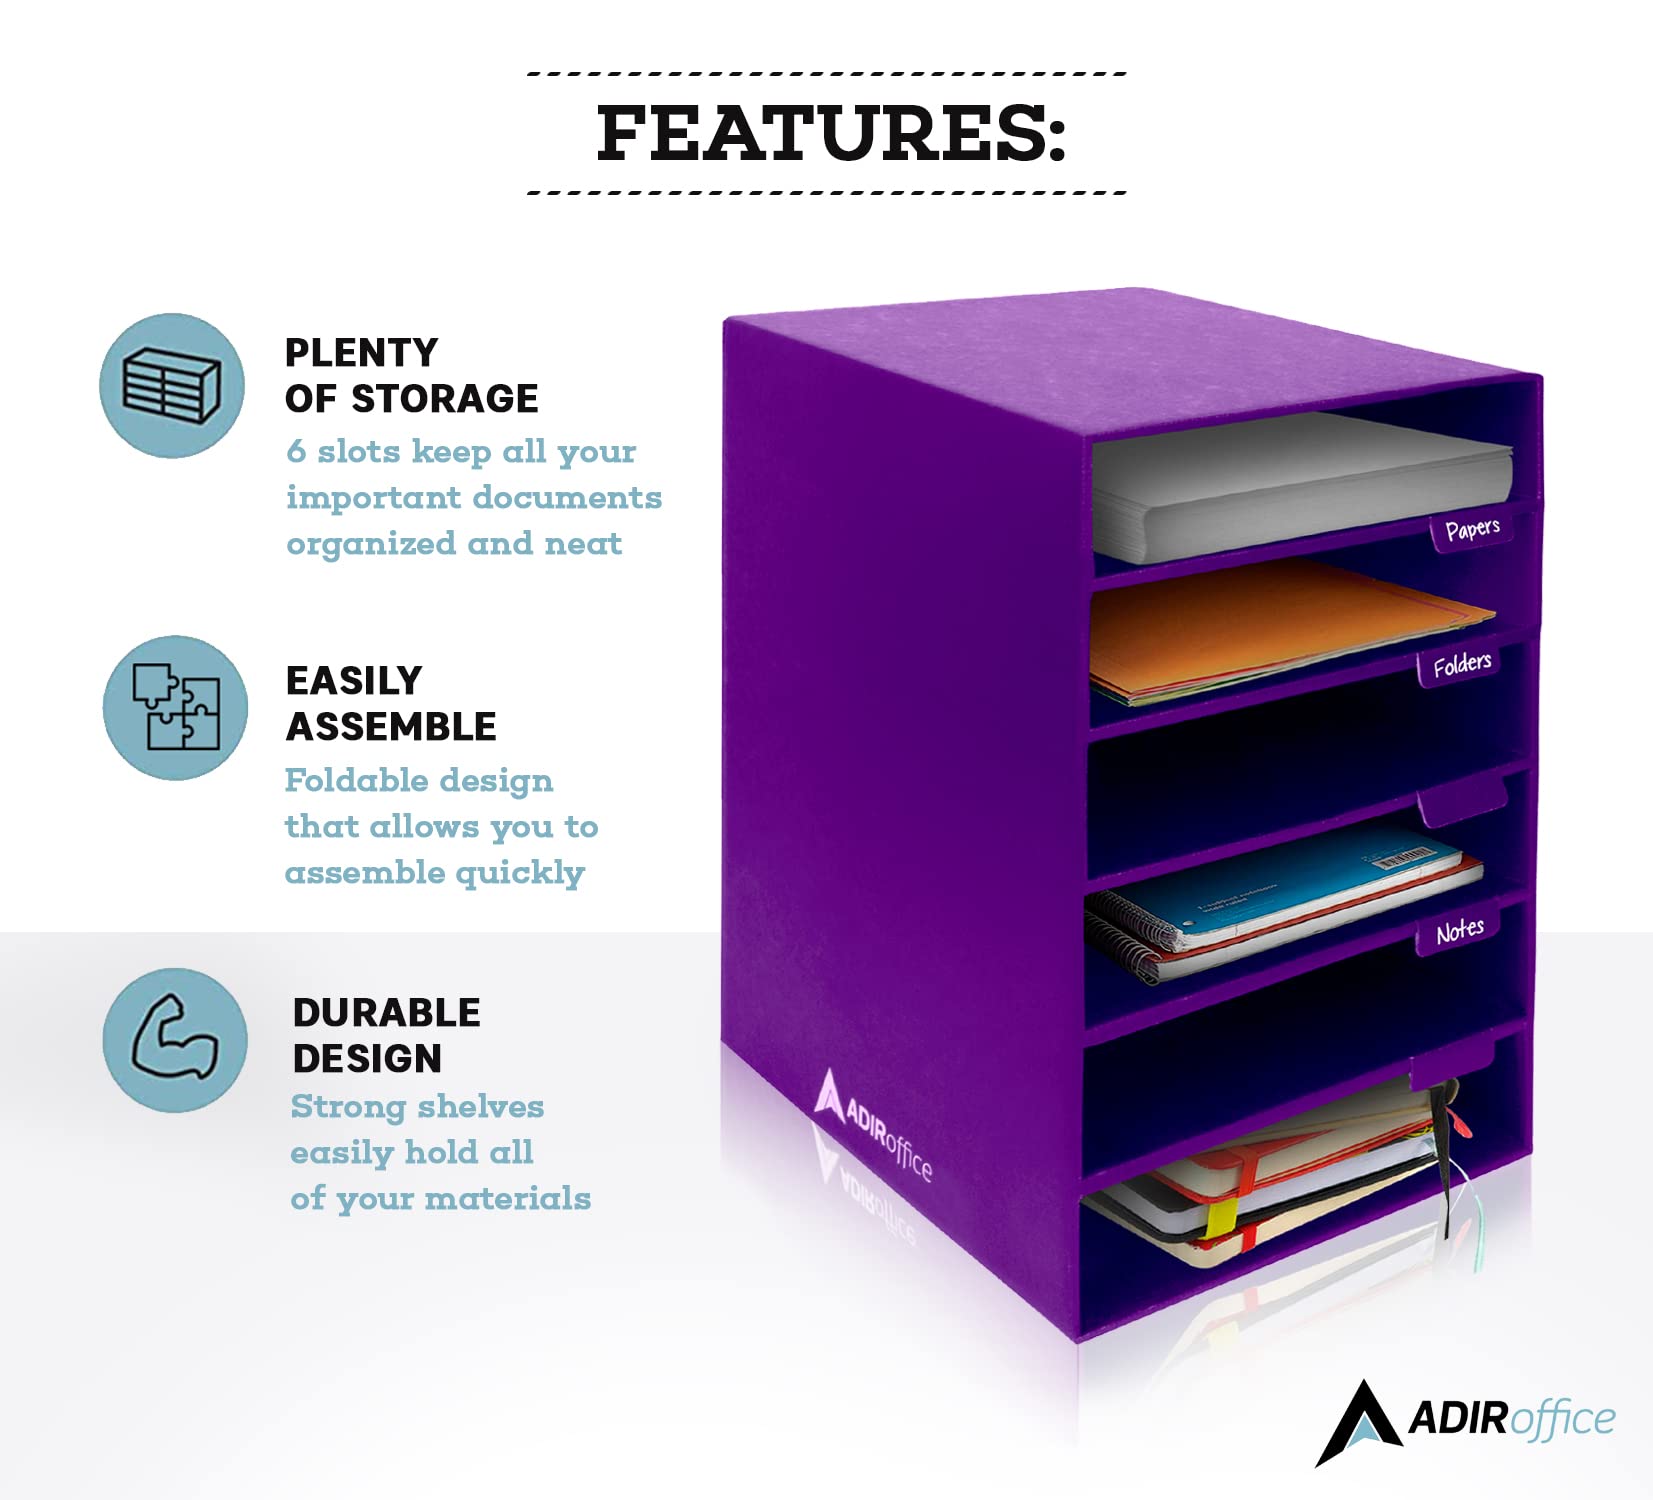 AdirOffice Cardboard Paper Organizer - Classroom Mailbox, Literature Organizers, Office Sorter Mailboxes, Construction Papers Storage with Slots, Compartment Shelf Holder (6 Slot, Purple)  - Like New